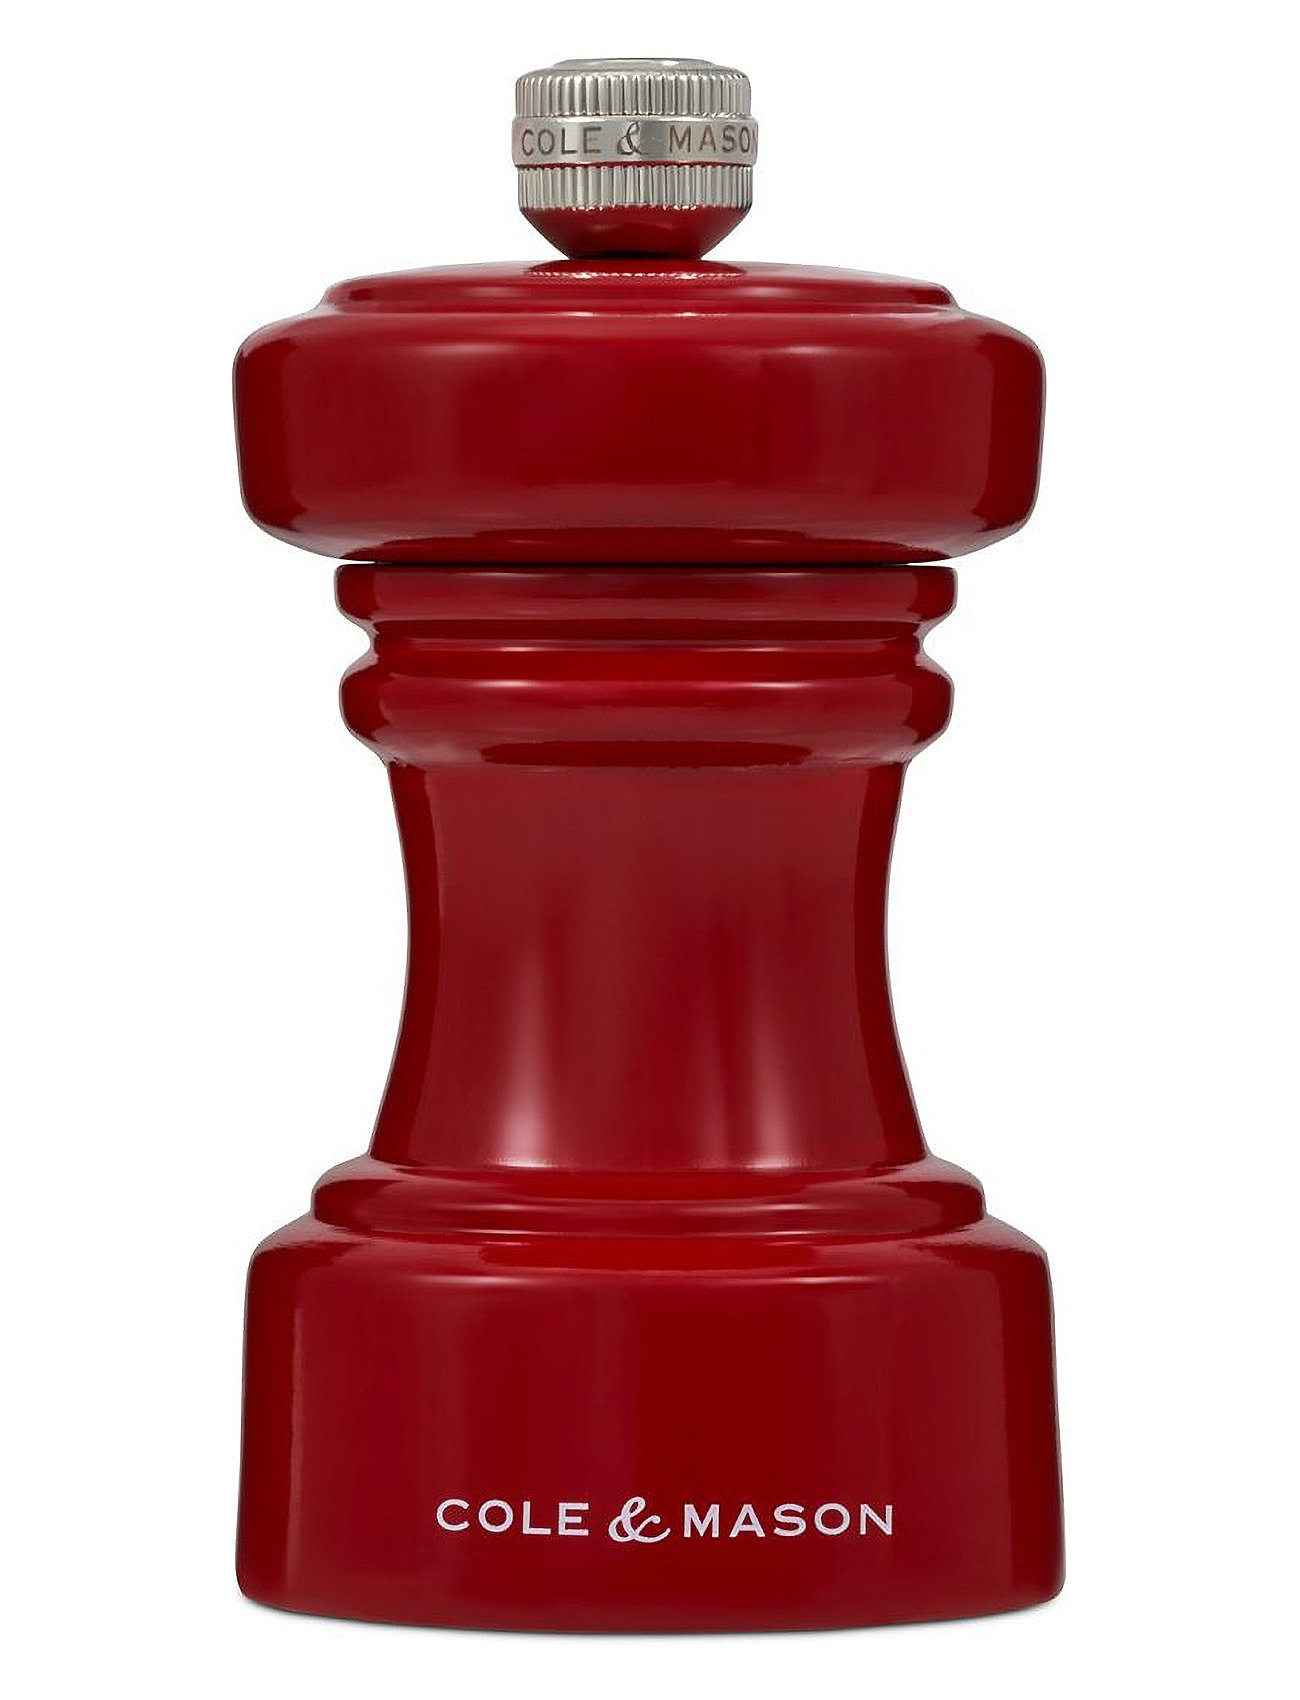 Pepper Gloss Hoxton Cole&Mason Home Kitchen Kitchen Tools Grinders Salt & Pepper Shakers Red Cole & Mason